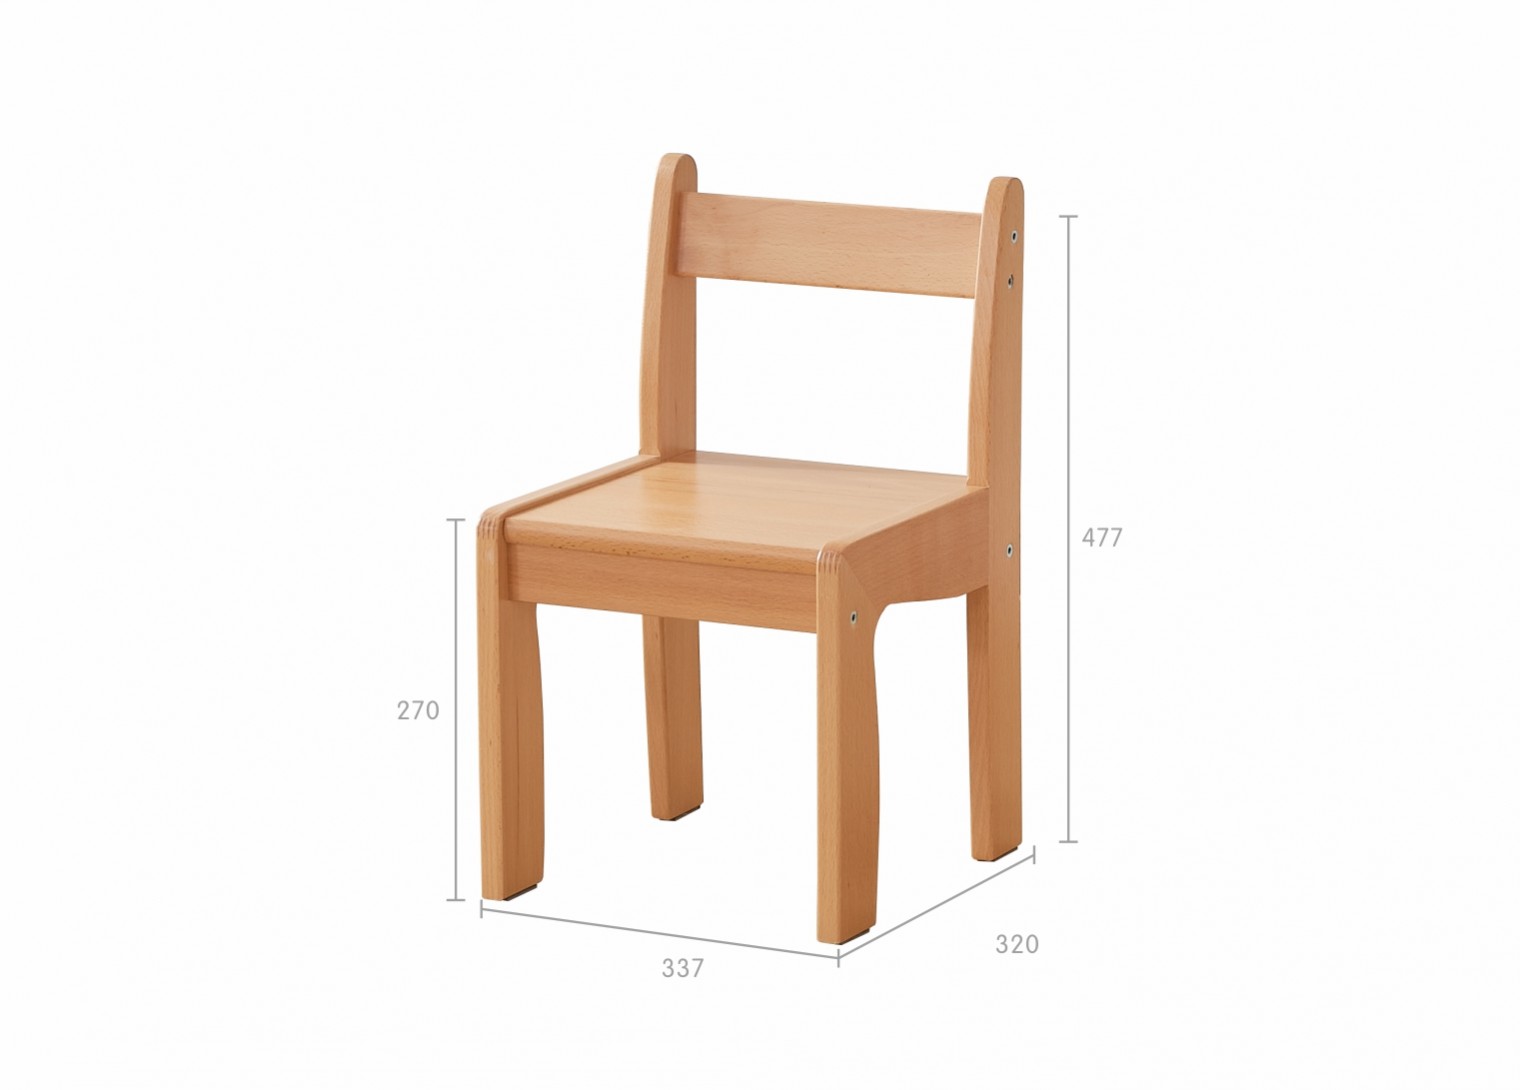 Forest School - 270H Wooden Chair